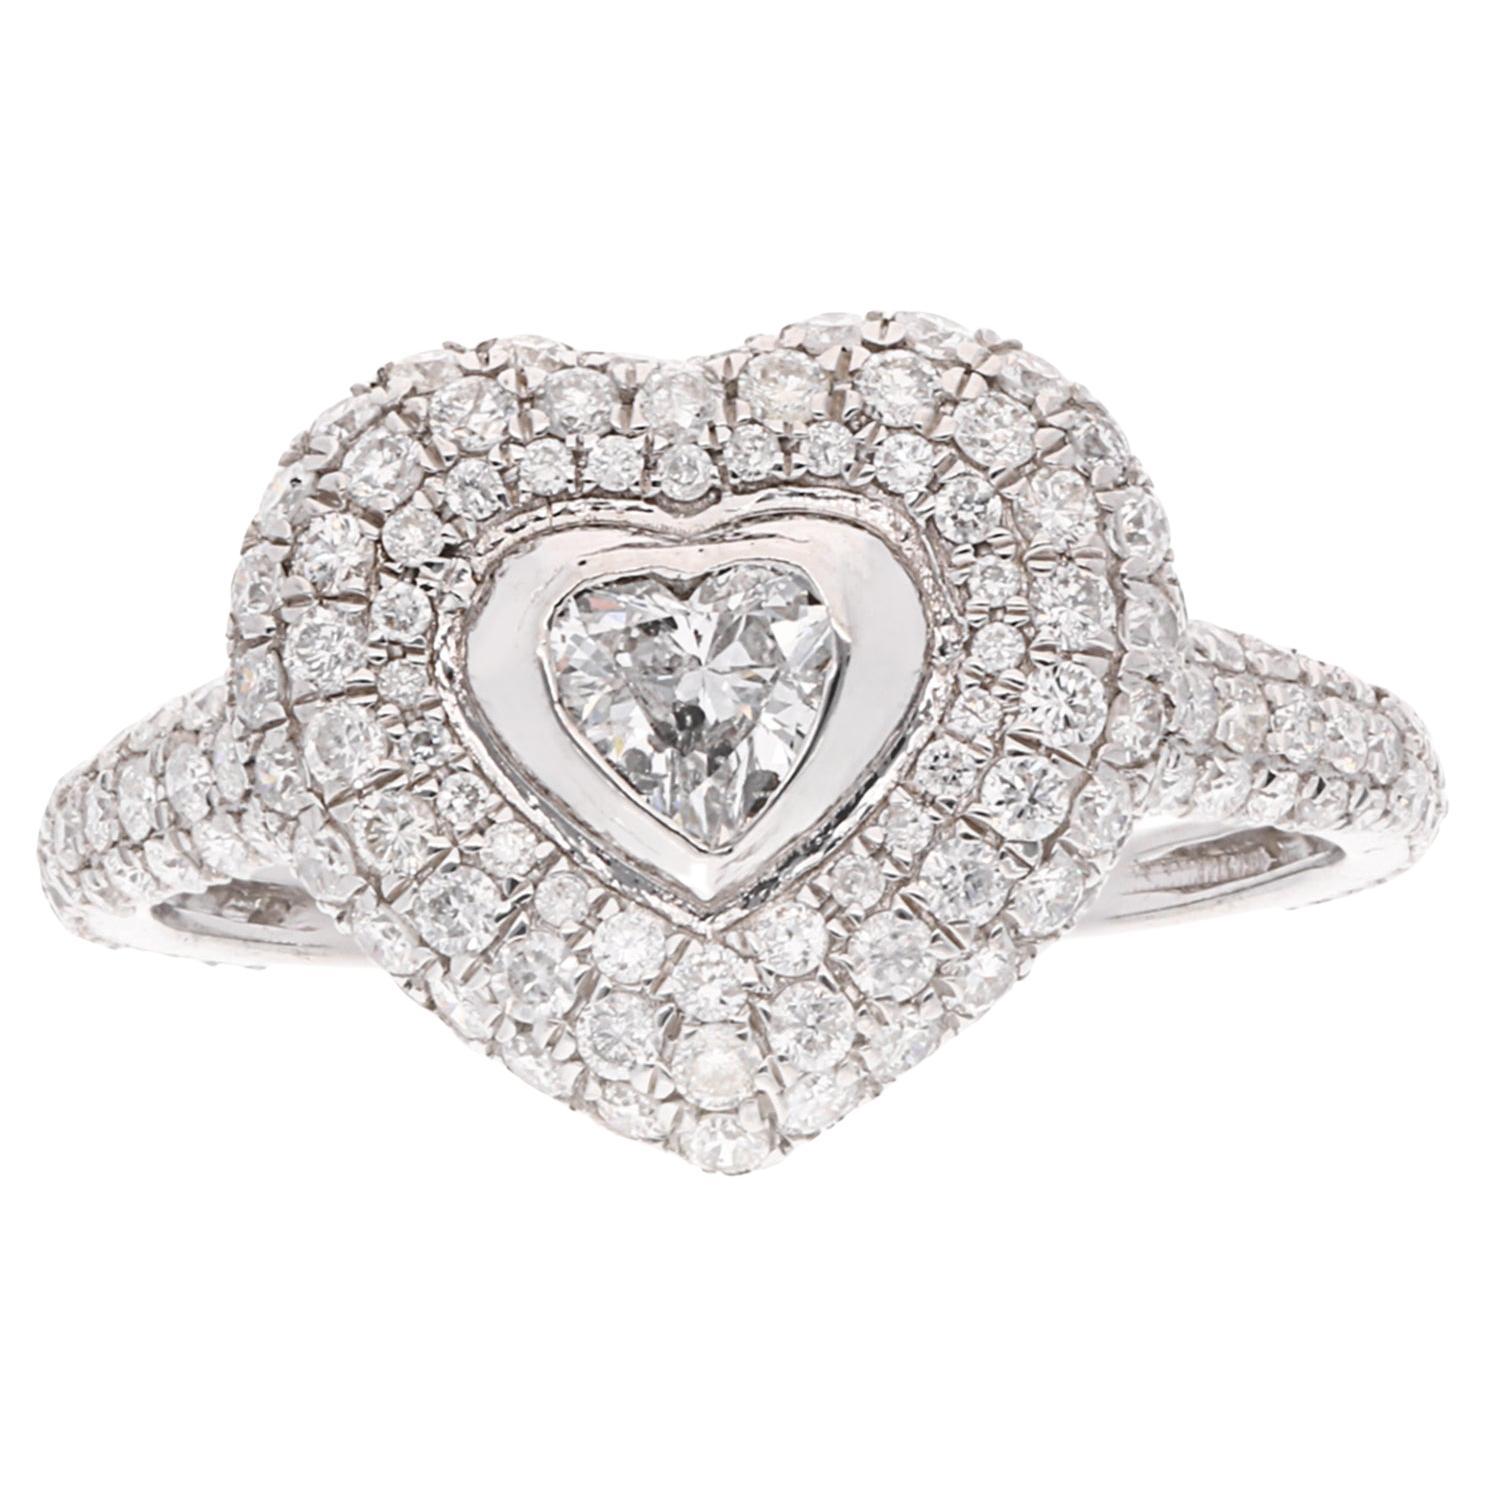 1.5 Carat SI Clarity HI Color Diamond Heart Ring 18k White Gold Handmade Jewelry For Sale